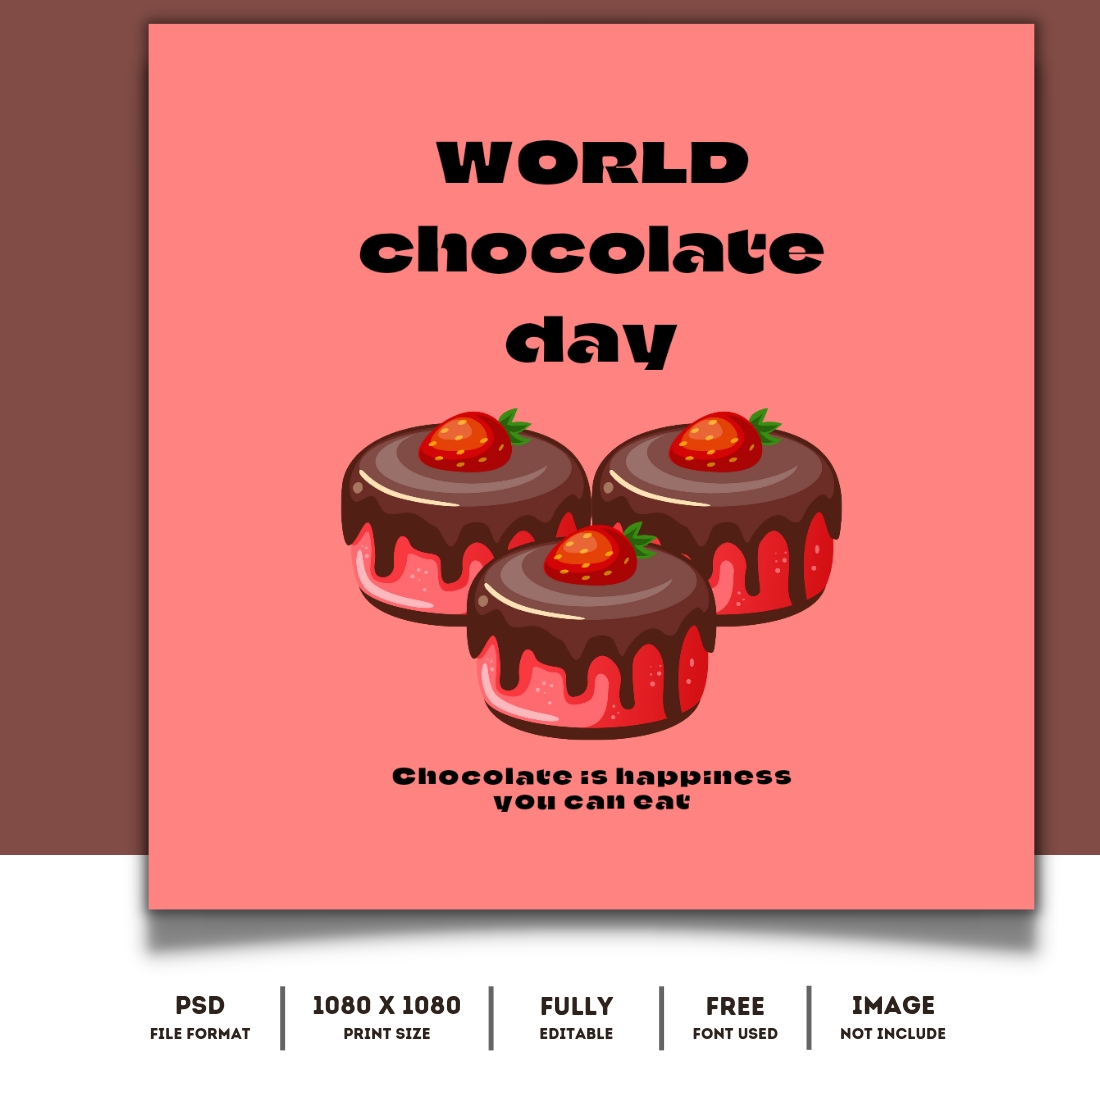 Chocolate Day Special Social Media Post Template main cover.